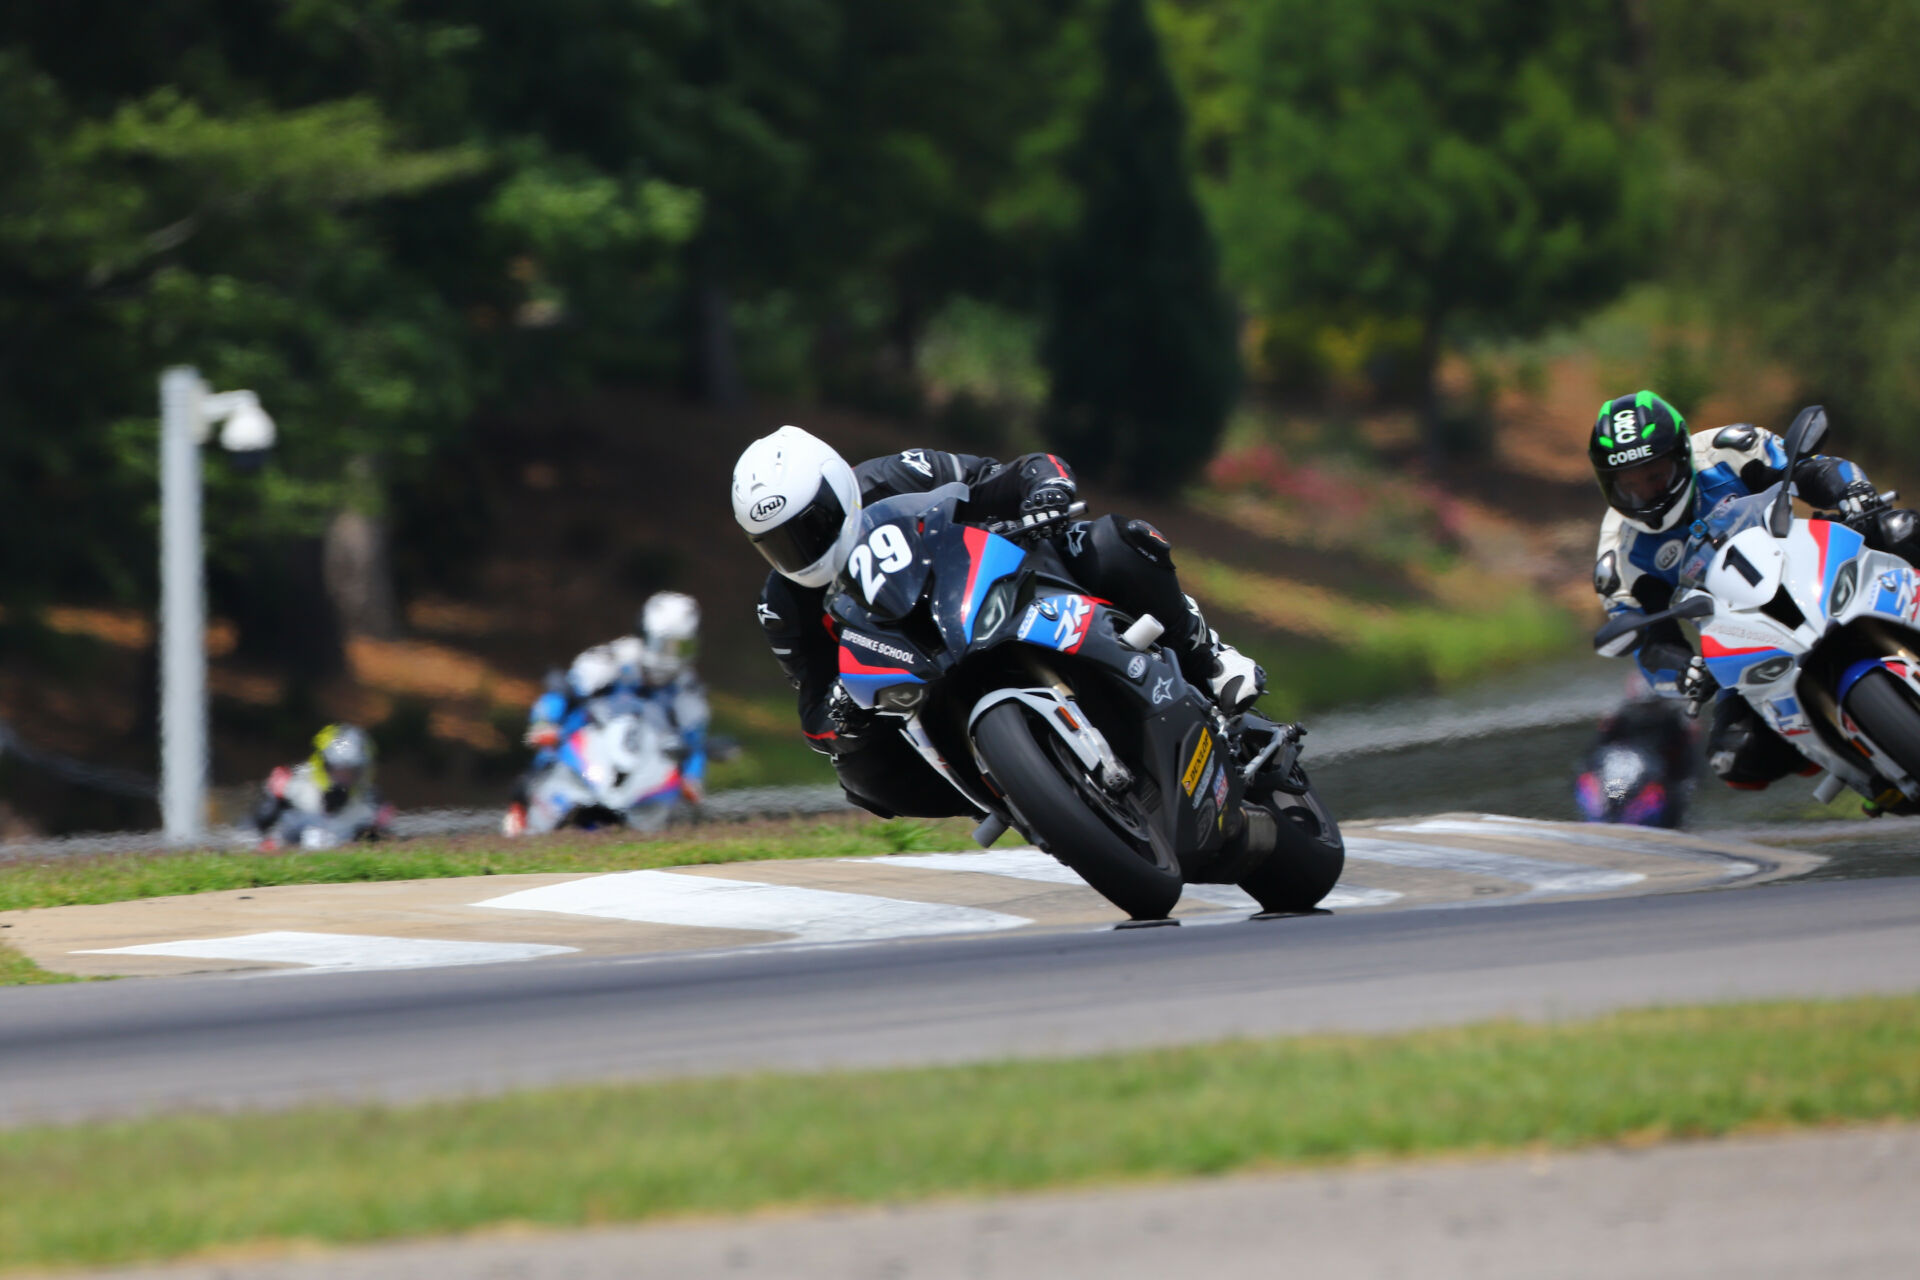 California Superbike School students in action at Barber Motorsports Park. Photo courtesy California Superbike School.